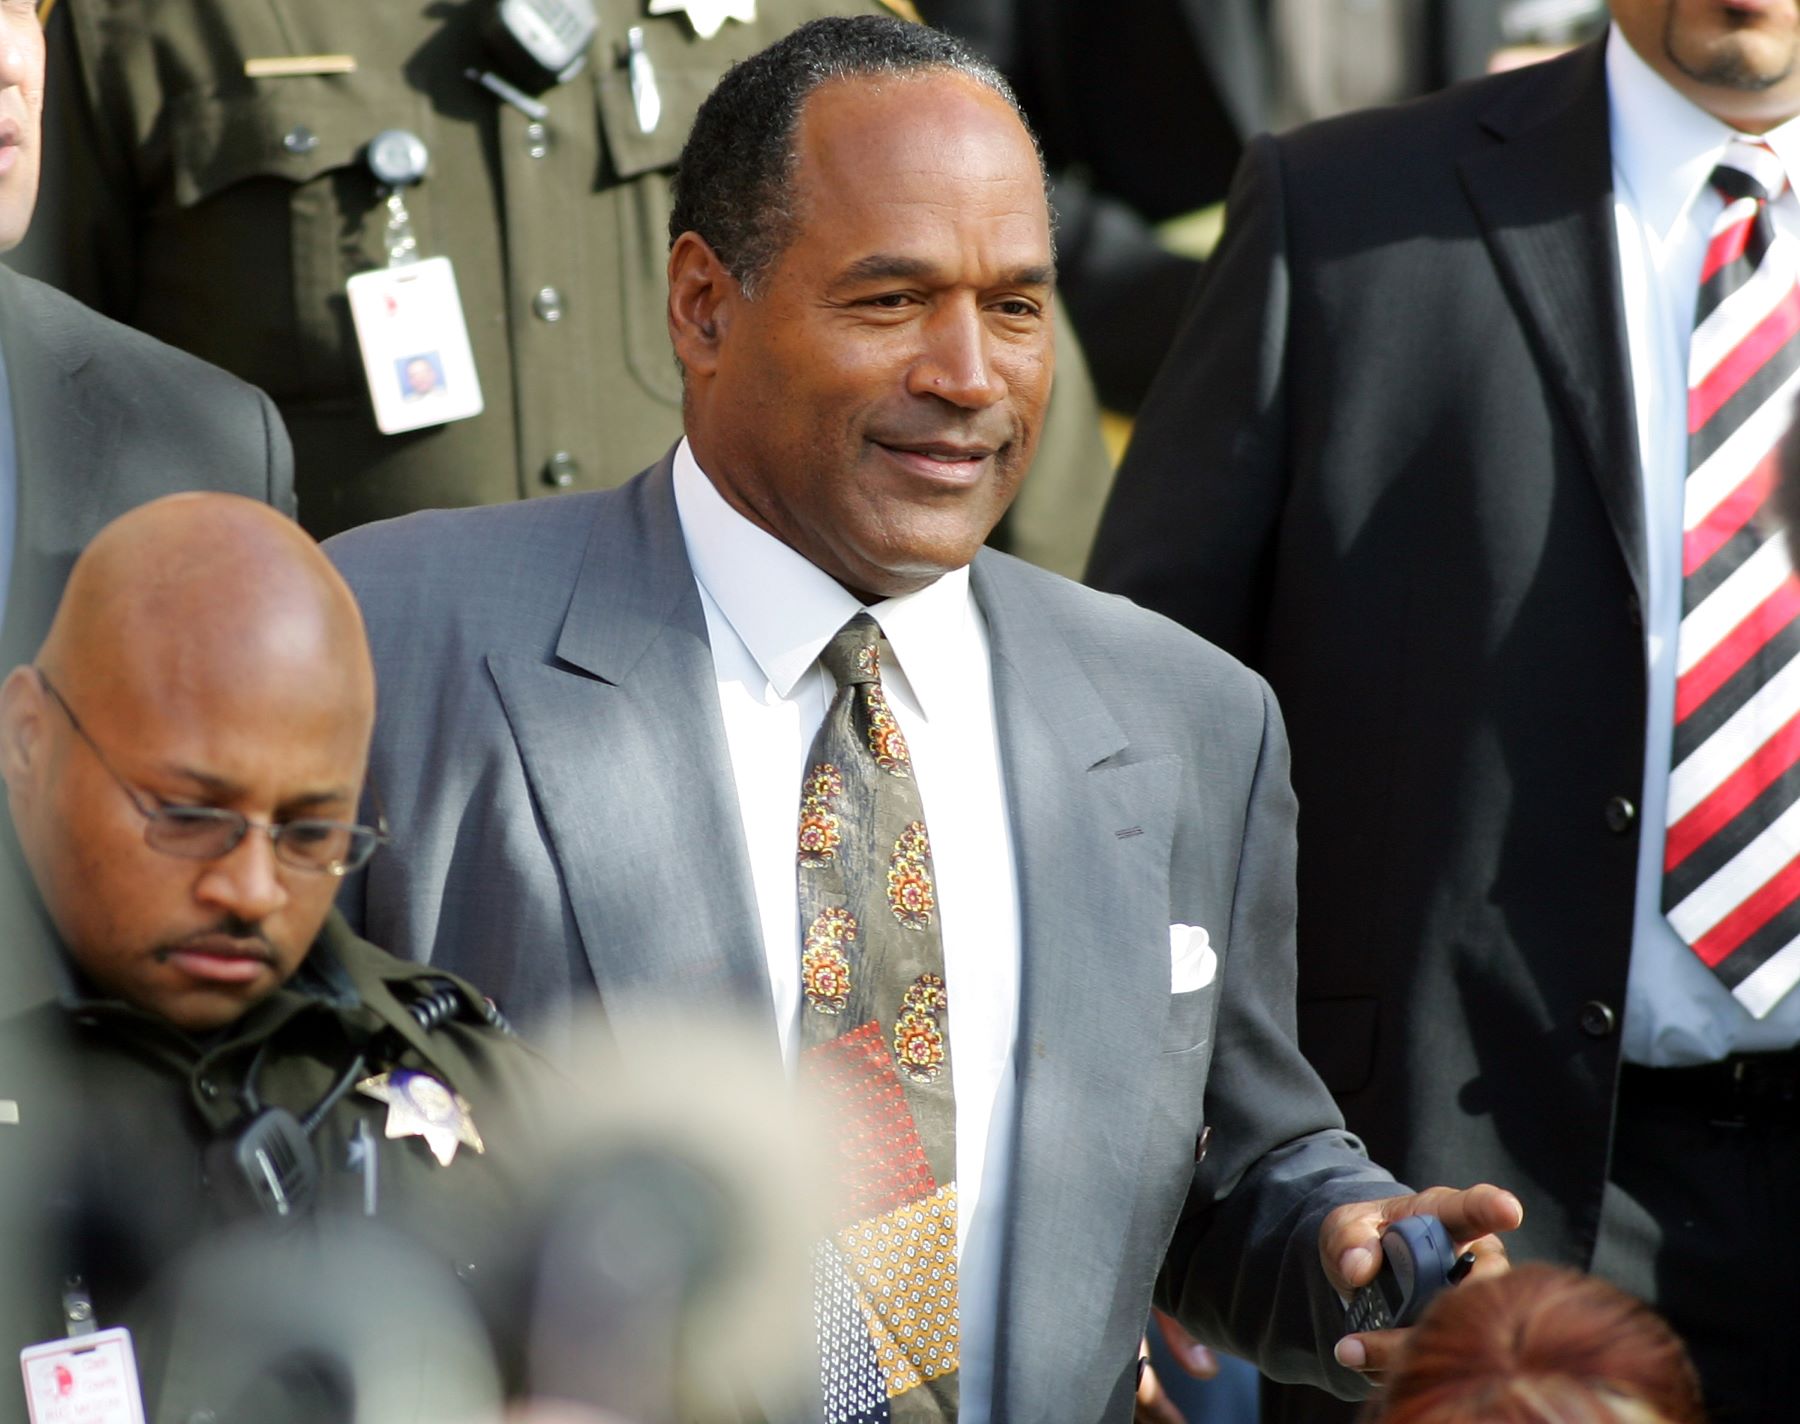 O.J. Simpson leaving Las Vegas Court before prison sentencing for burglary, robbery, and assault charges